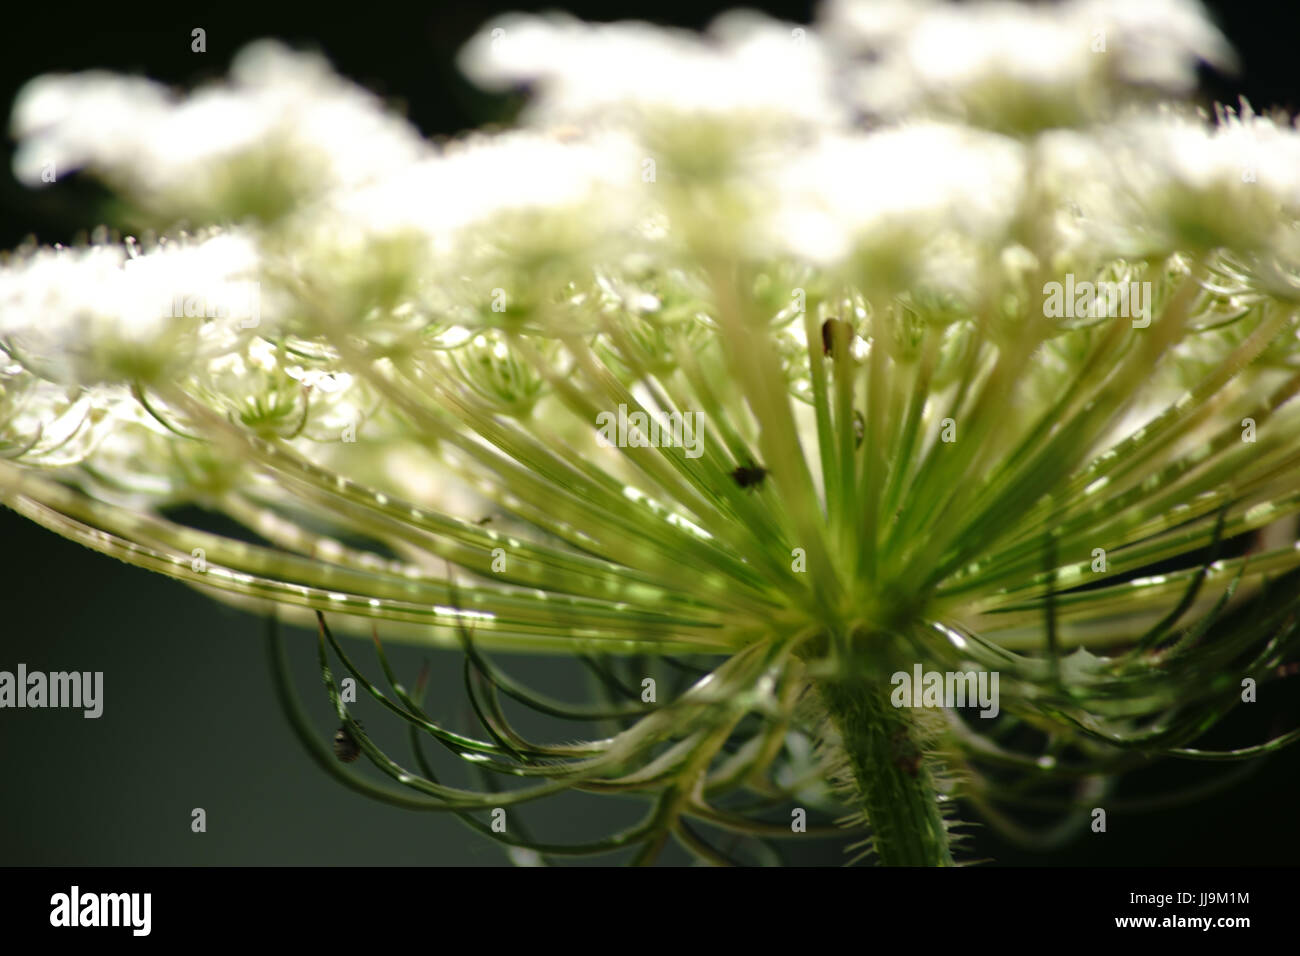 The close-up and side view of the umbel of the Pimpinella major. Stock Photo